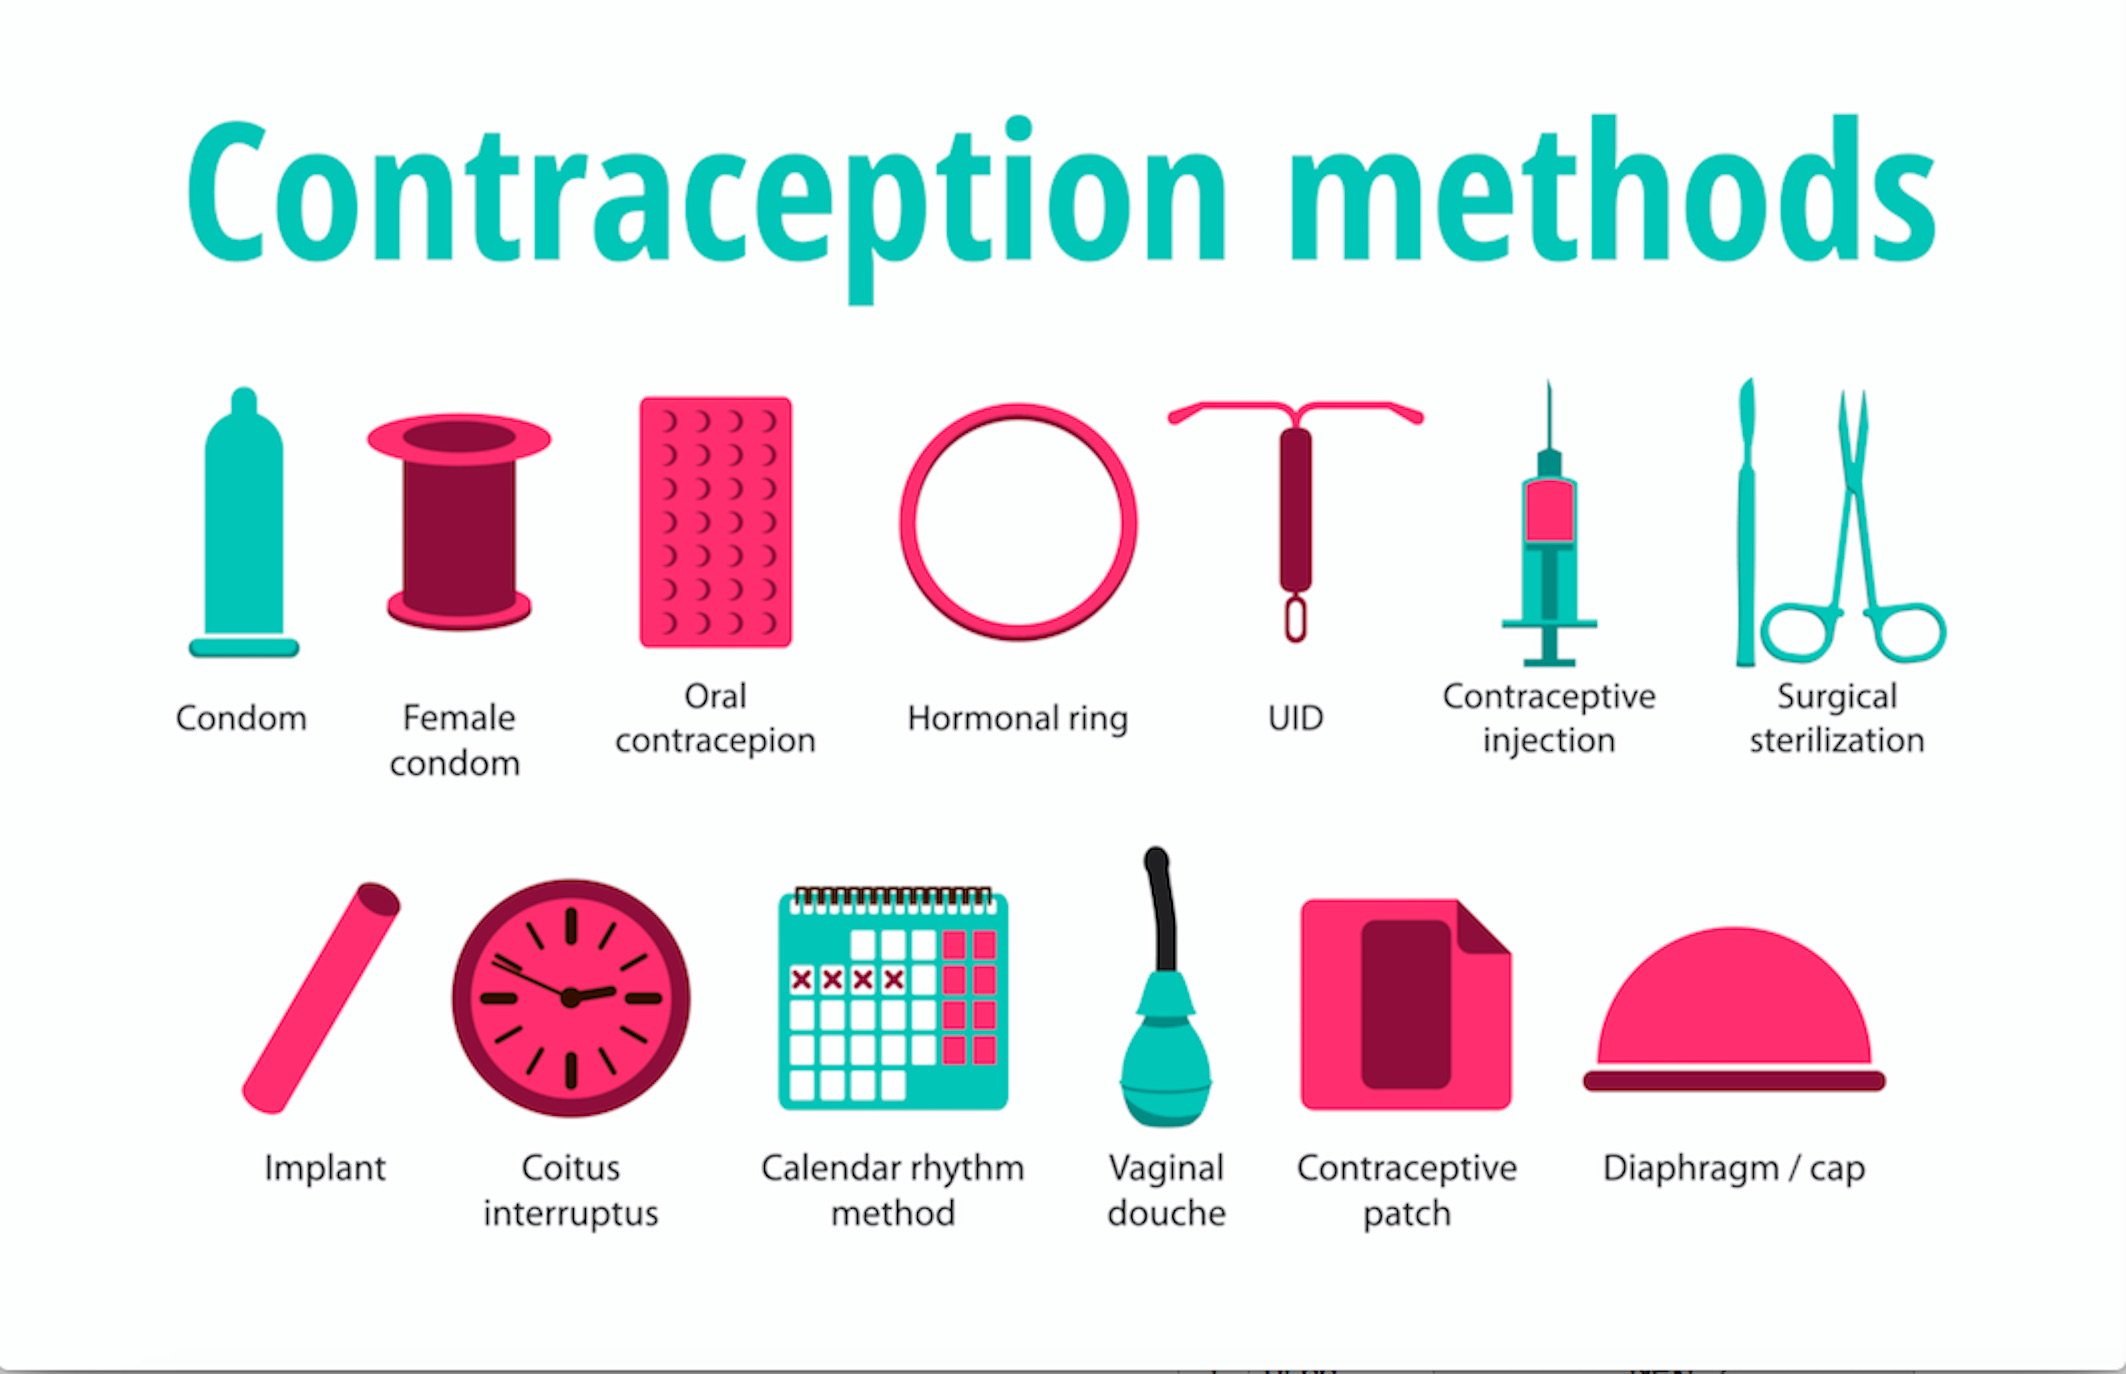 Contraceptive Reference Chart 2017